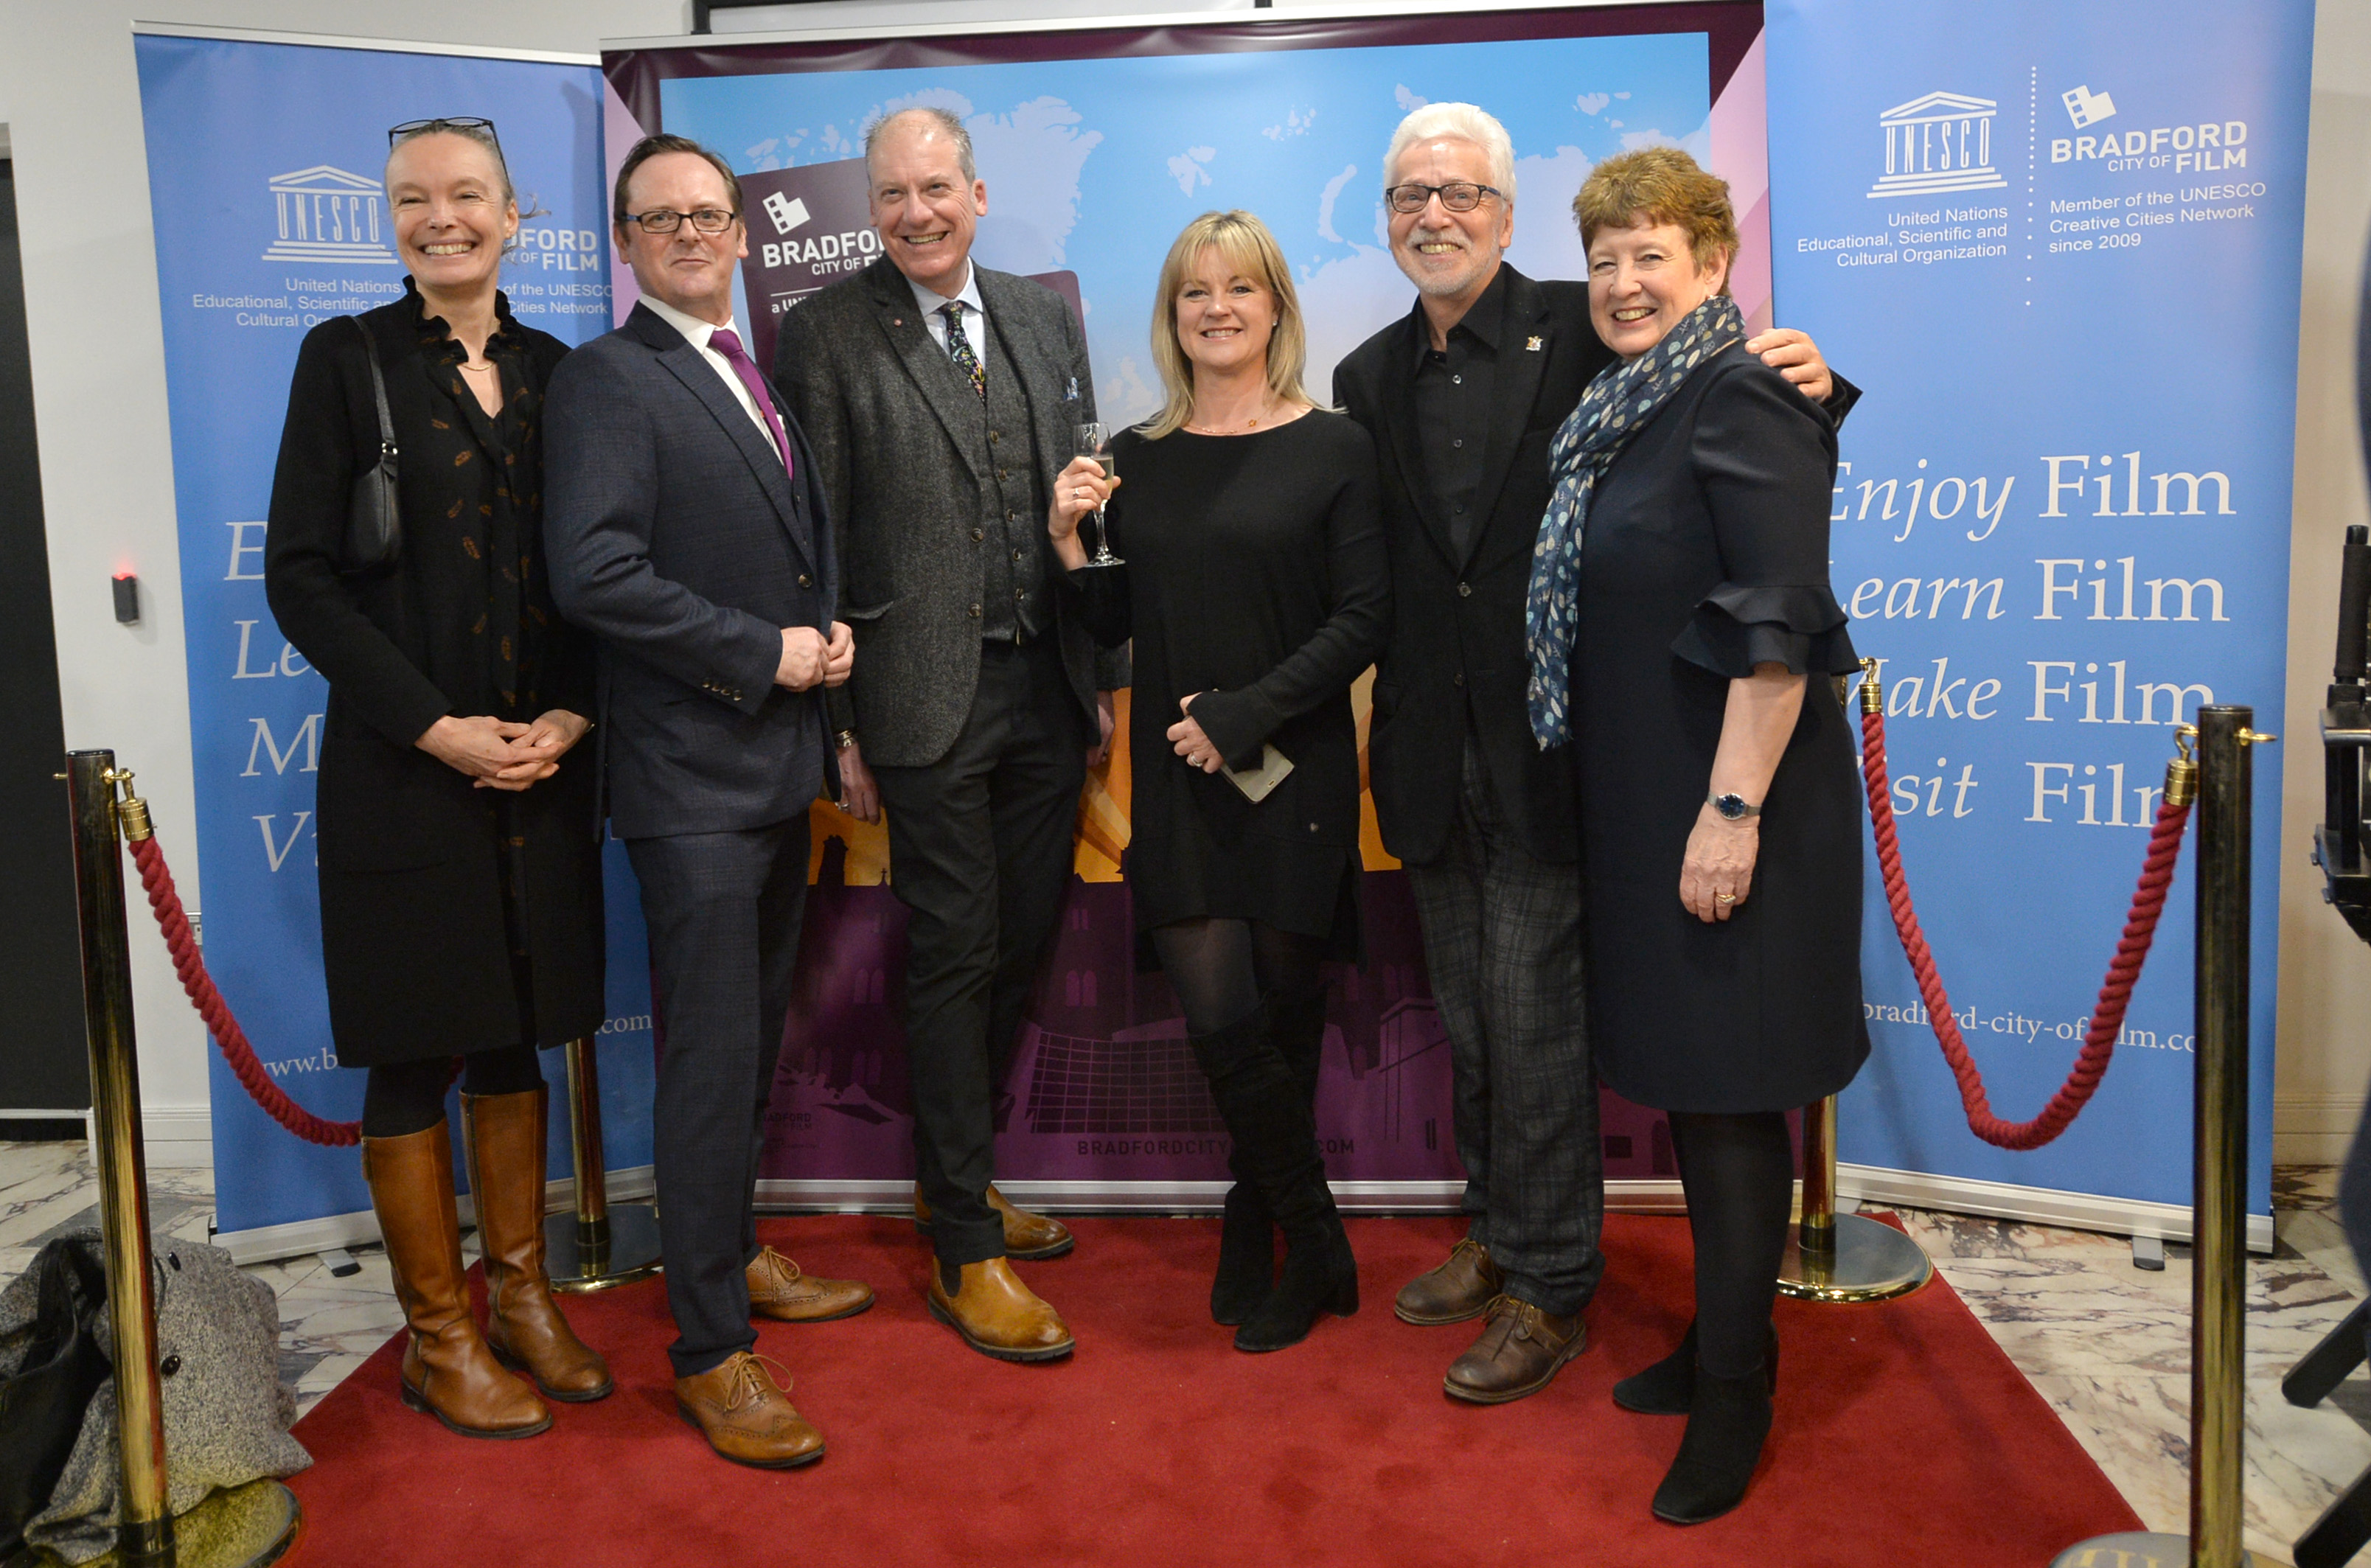 National Science and Media Museum Director Jo Quinton-Tulloch joins David Wilson and others on the red carpet at the Bradford UNESCO City of Film 10th anniversary reception